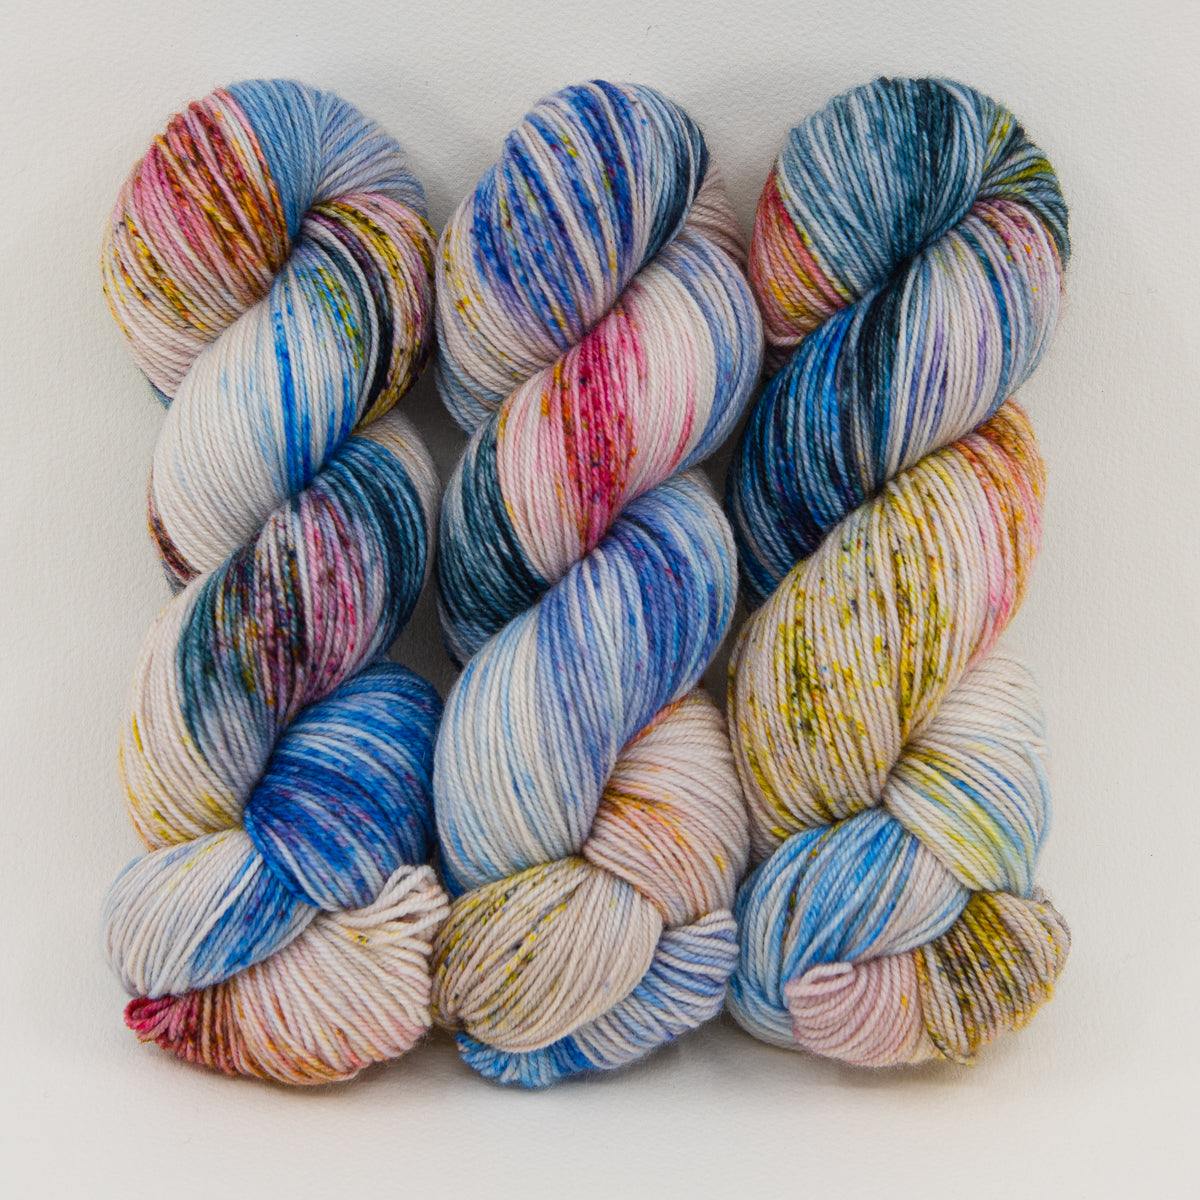 Le Berceau (The Cradle) - Morisot - Revival Worsted - Dyed Stock